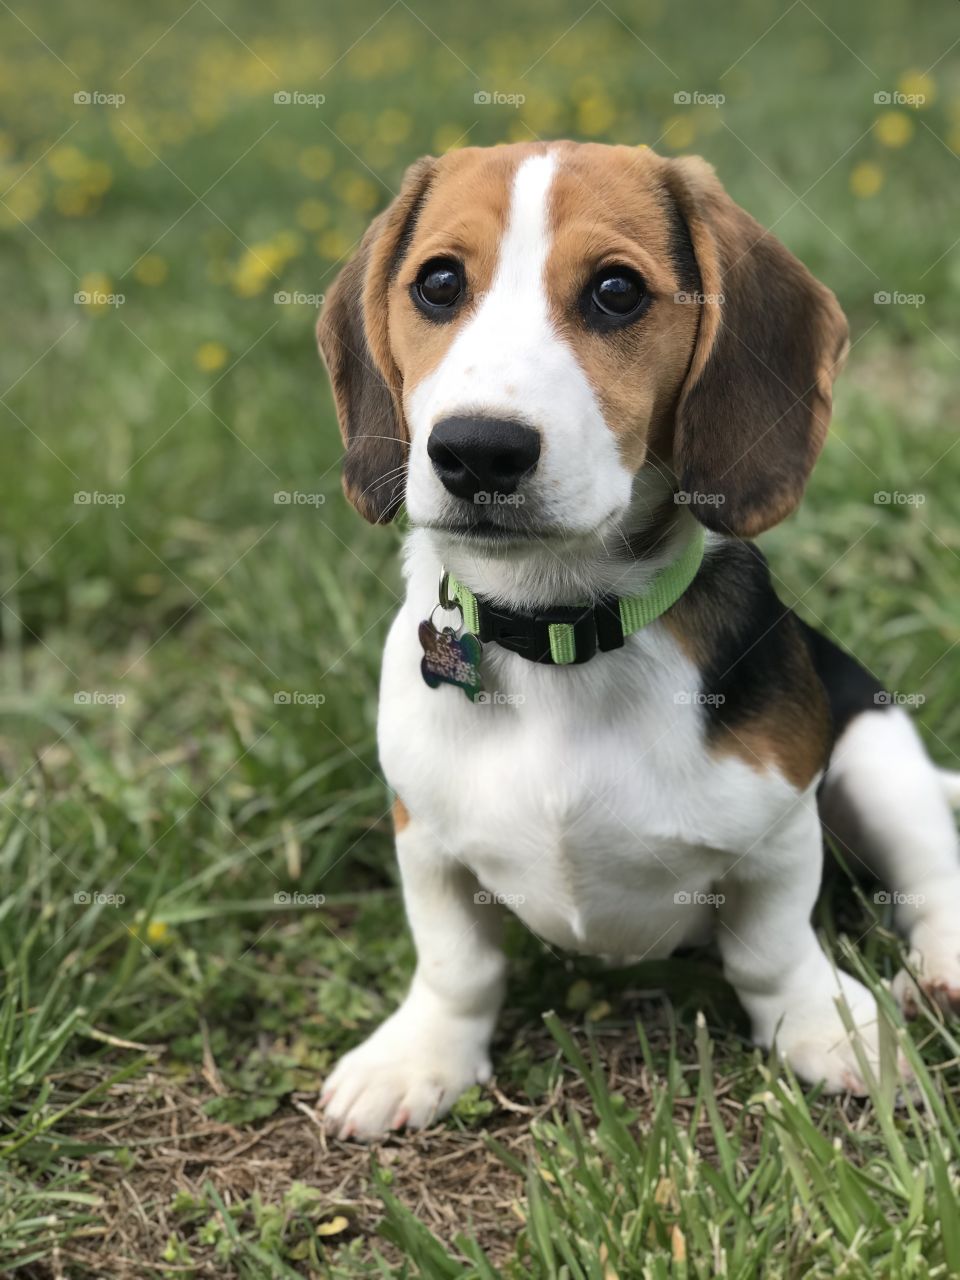 This is Rocket. He is a Doxle (beagle/daschund). In this photo he is 4 months old. 